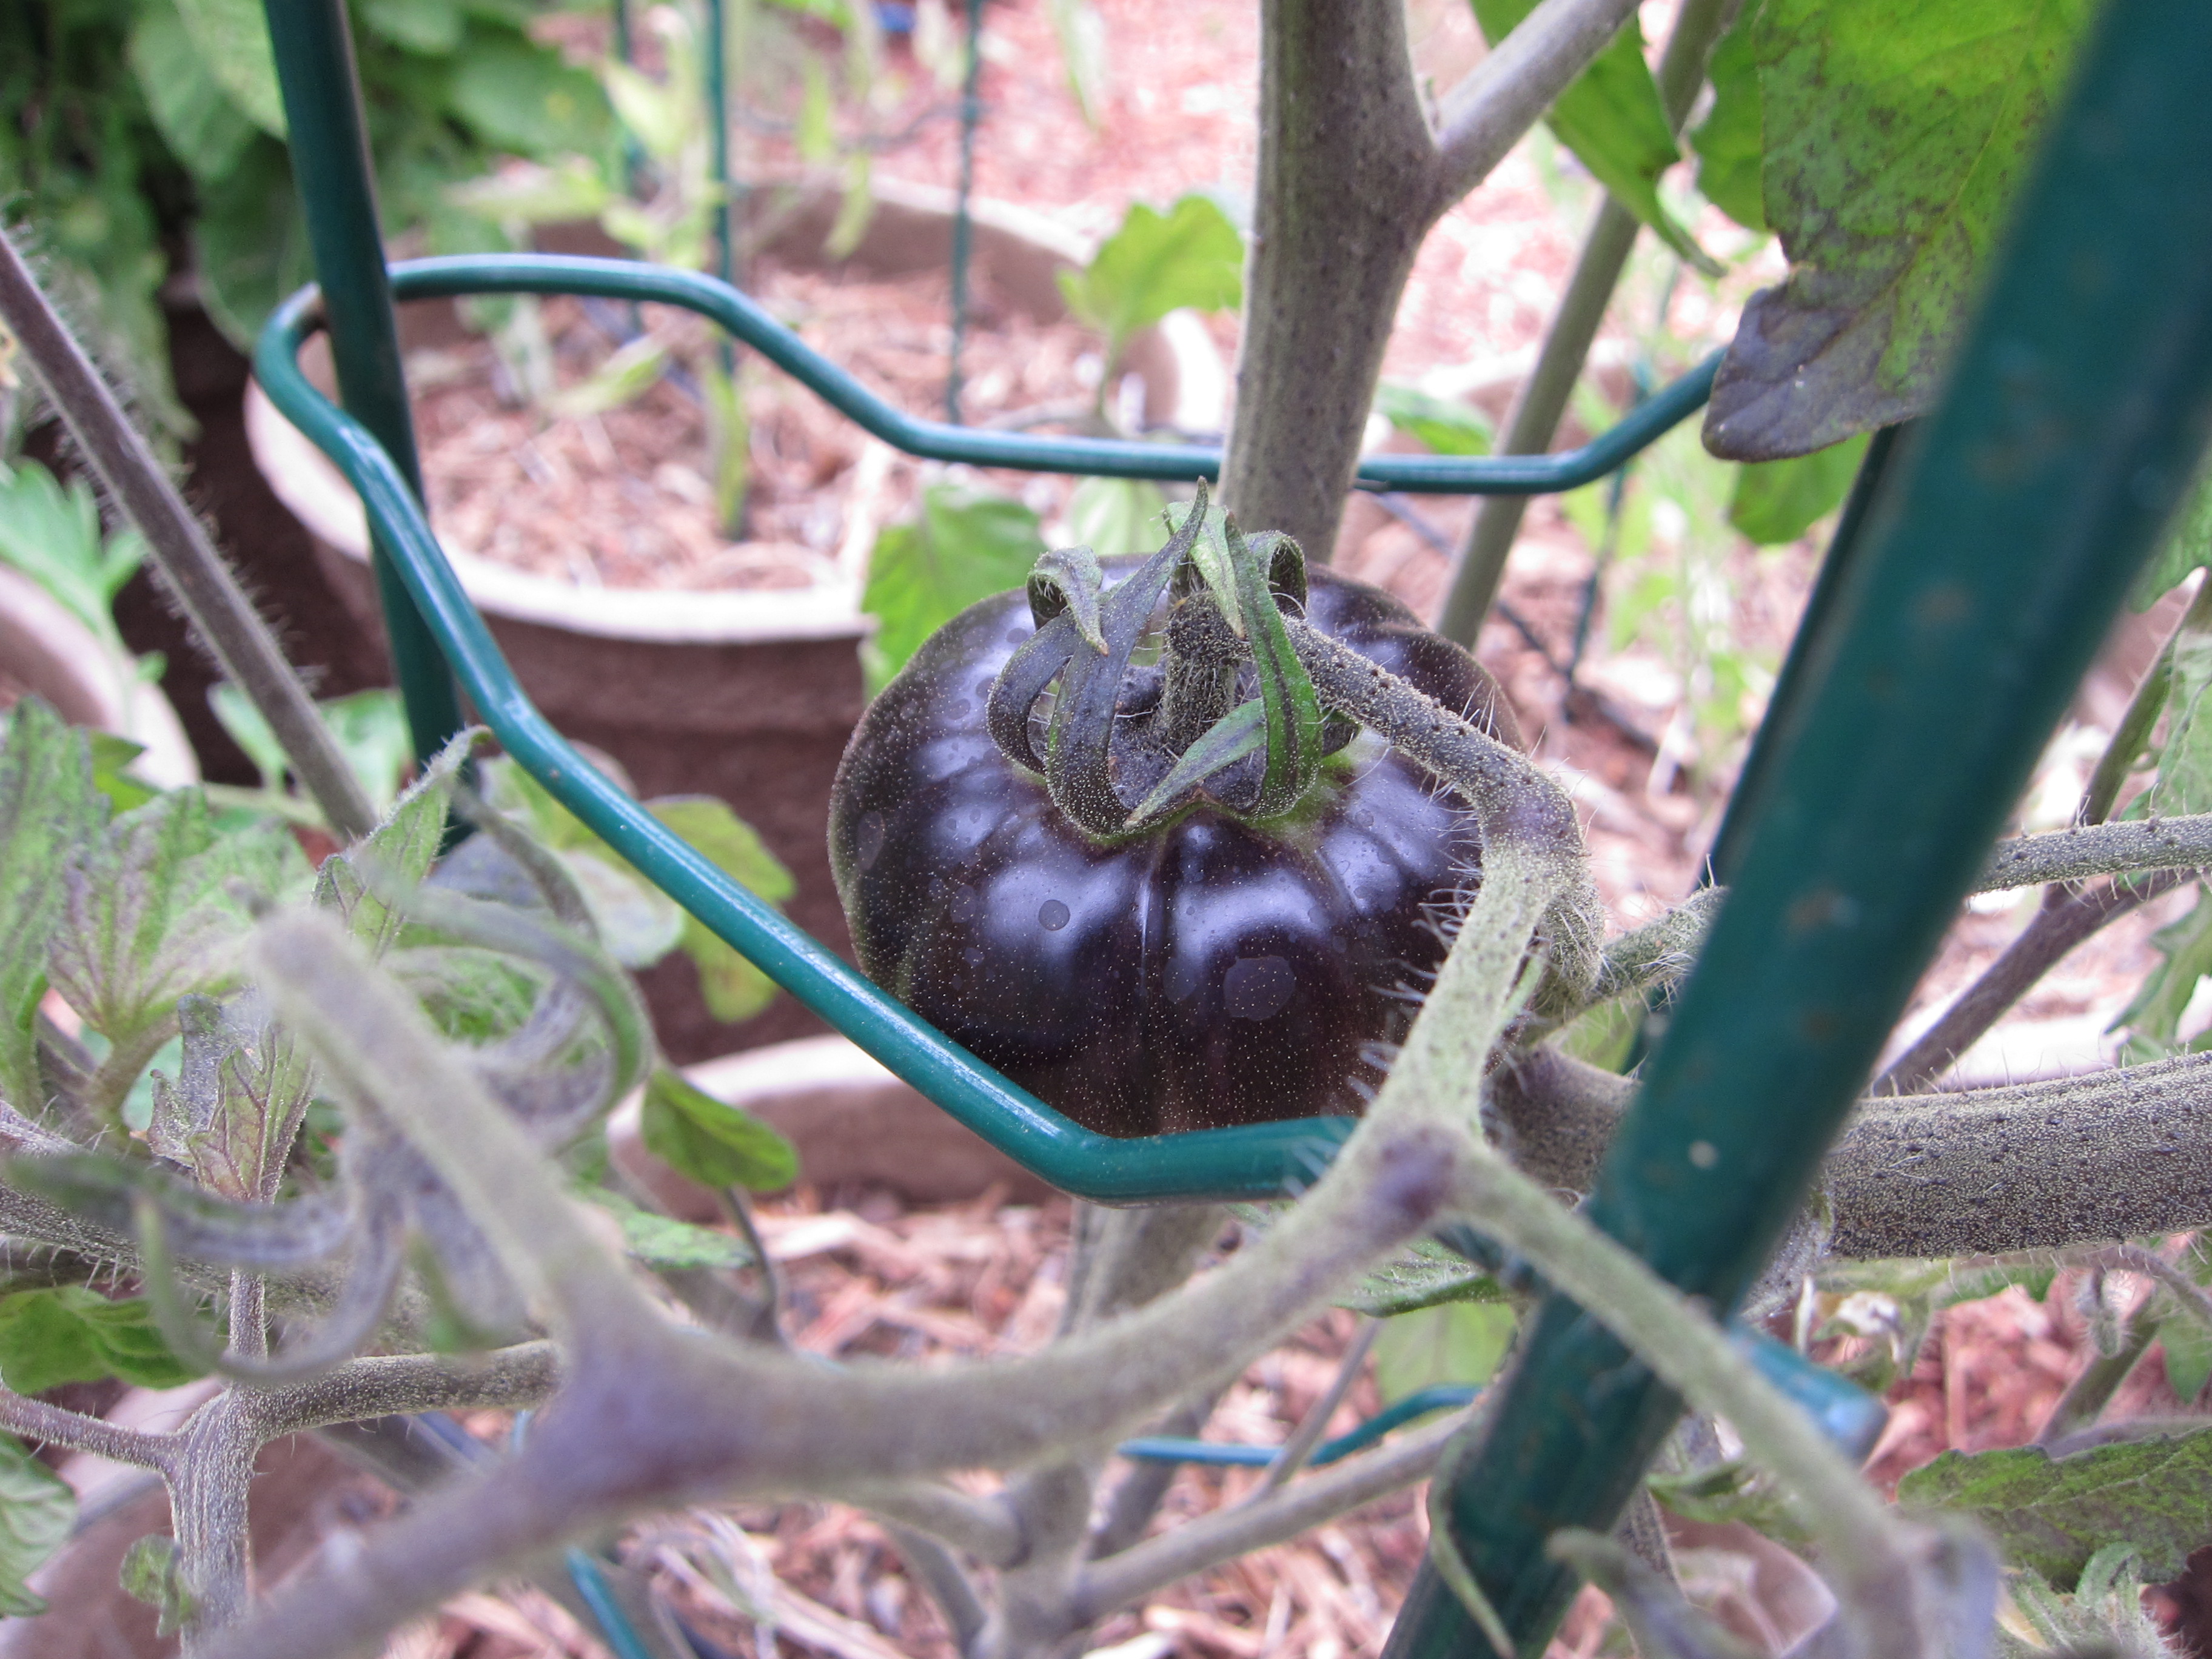 Blue Beauty tomato shows true blue. We just fed the tomatoes with compost tea. 